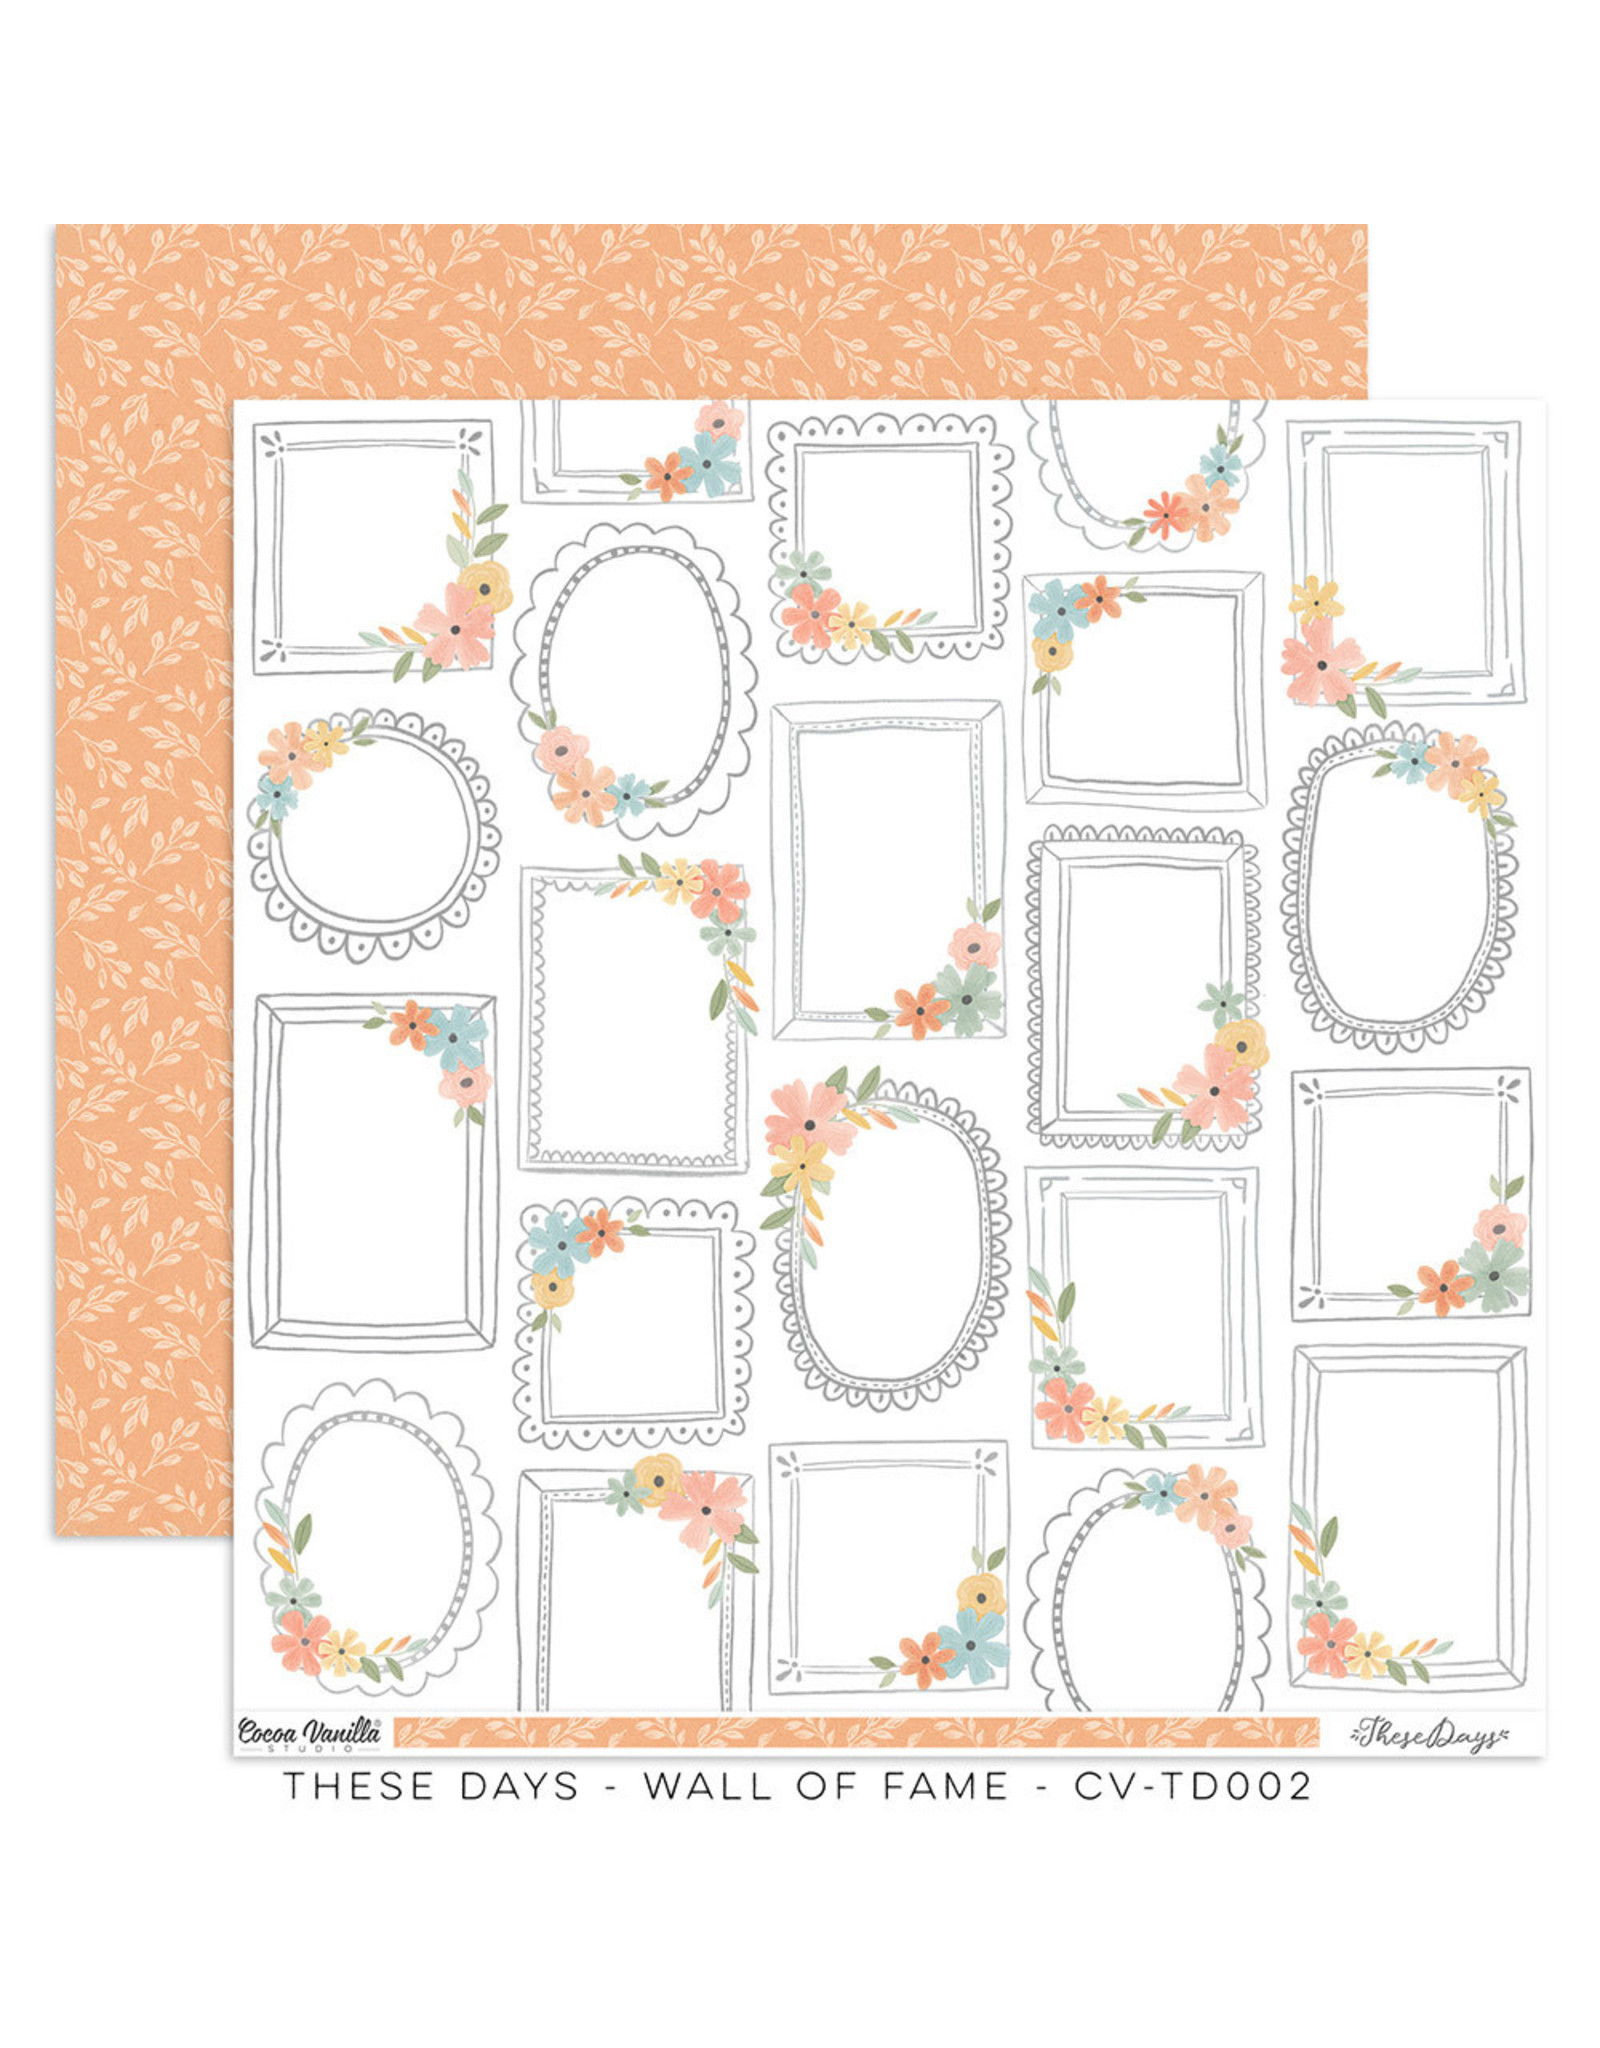 Cocoa Vanilla 12X12 Patterned Paper, These Days - Wall of Fame